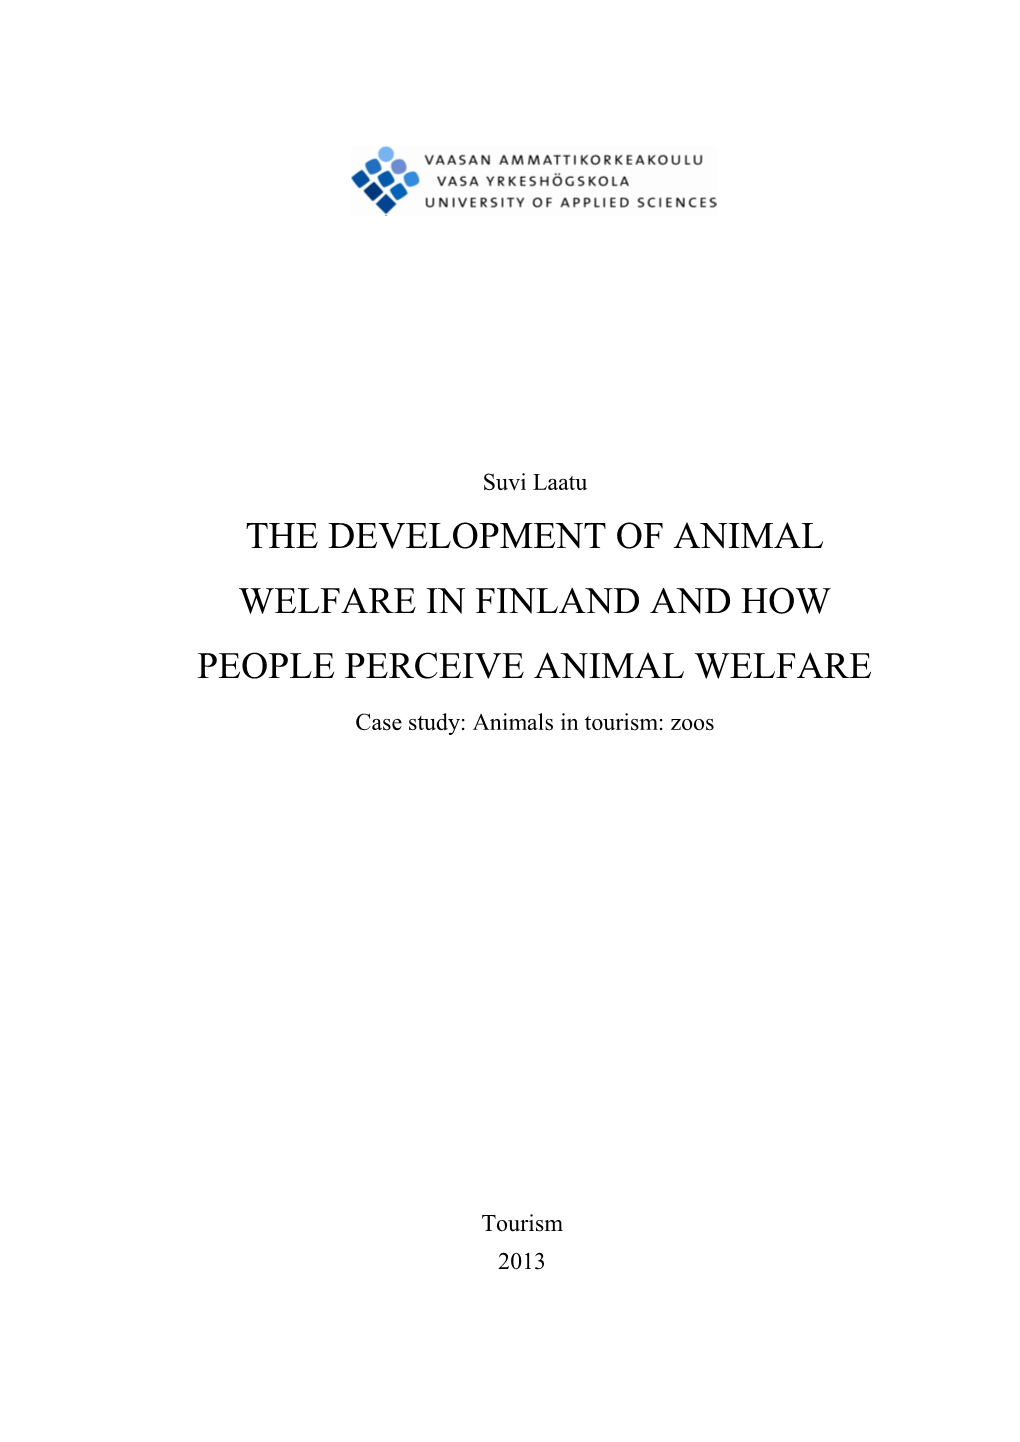 The Development of Animal Welfare in Finland and How People Perceive Animal Welfare